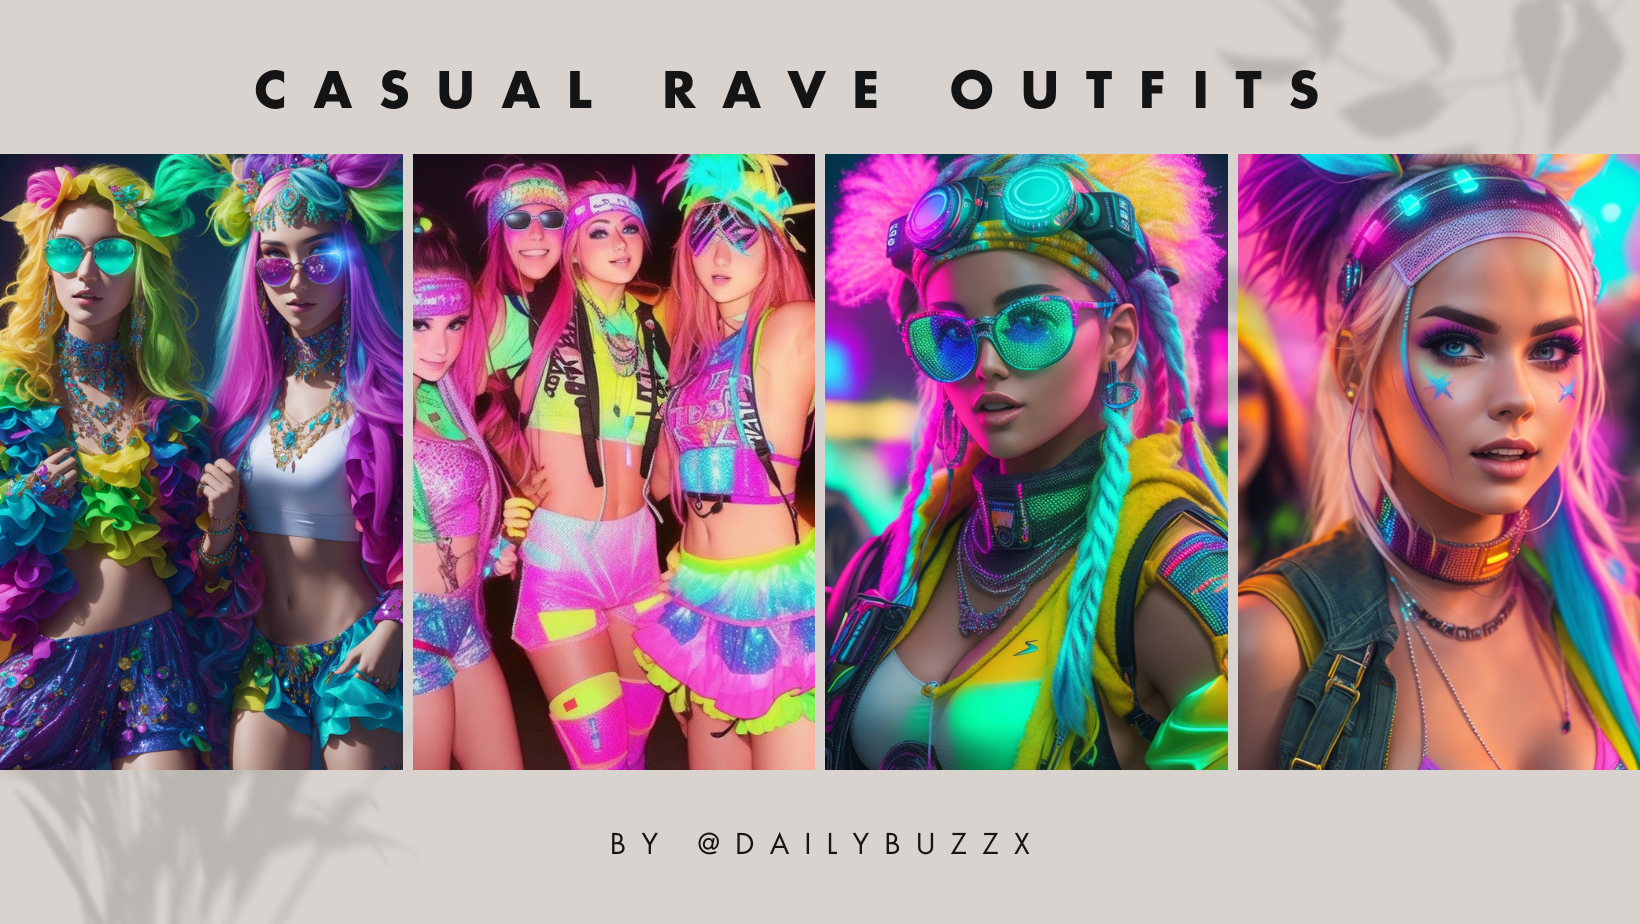 Casual Rave Outfits Styling Tips for Women